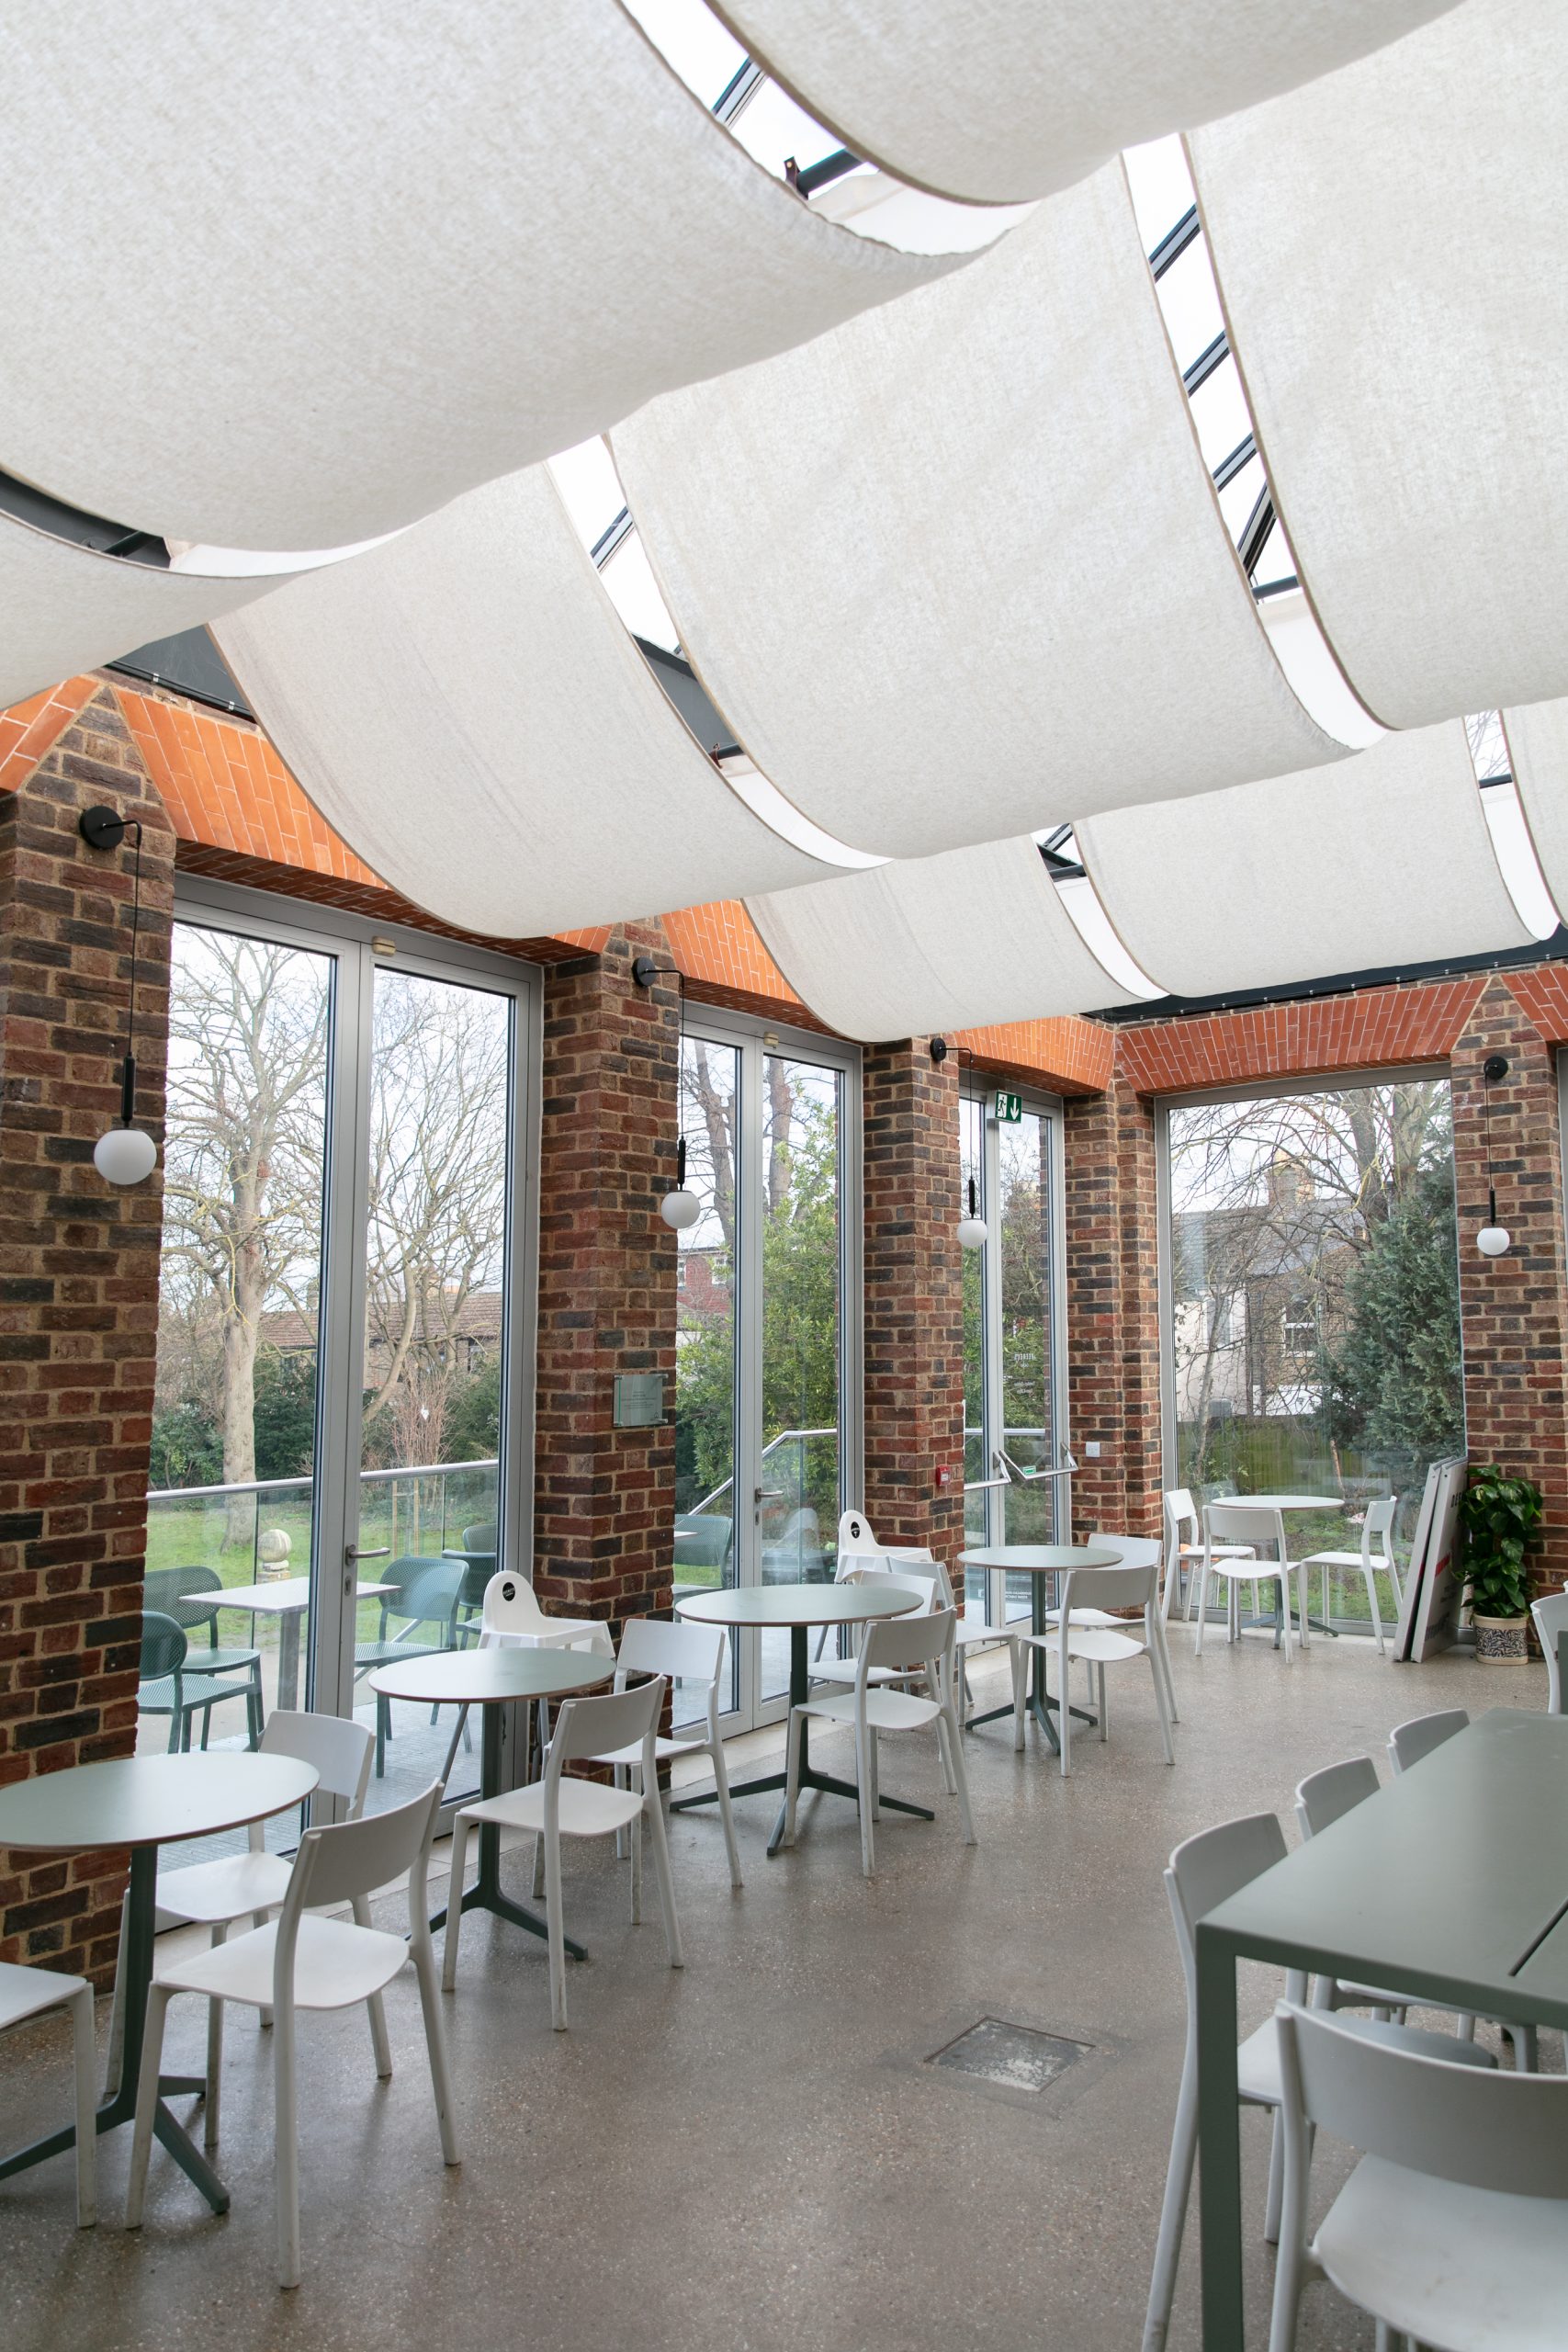 William Morris Gallery Cafe space. With fabric draped ceilings and views of Lloyd Park.